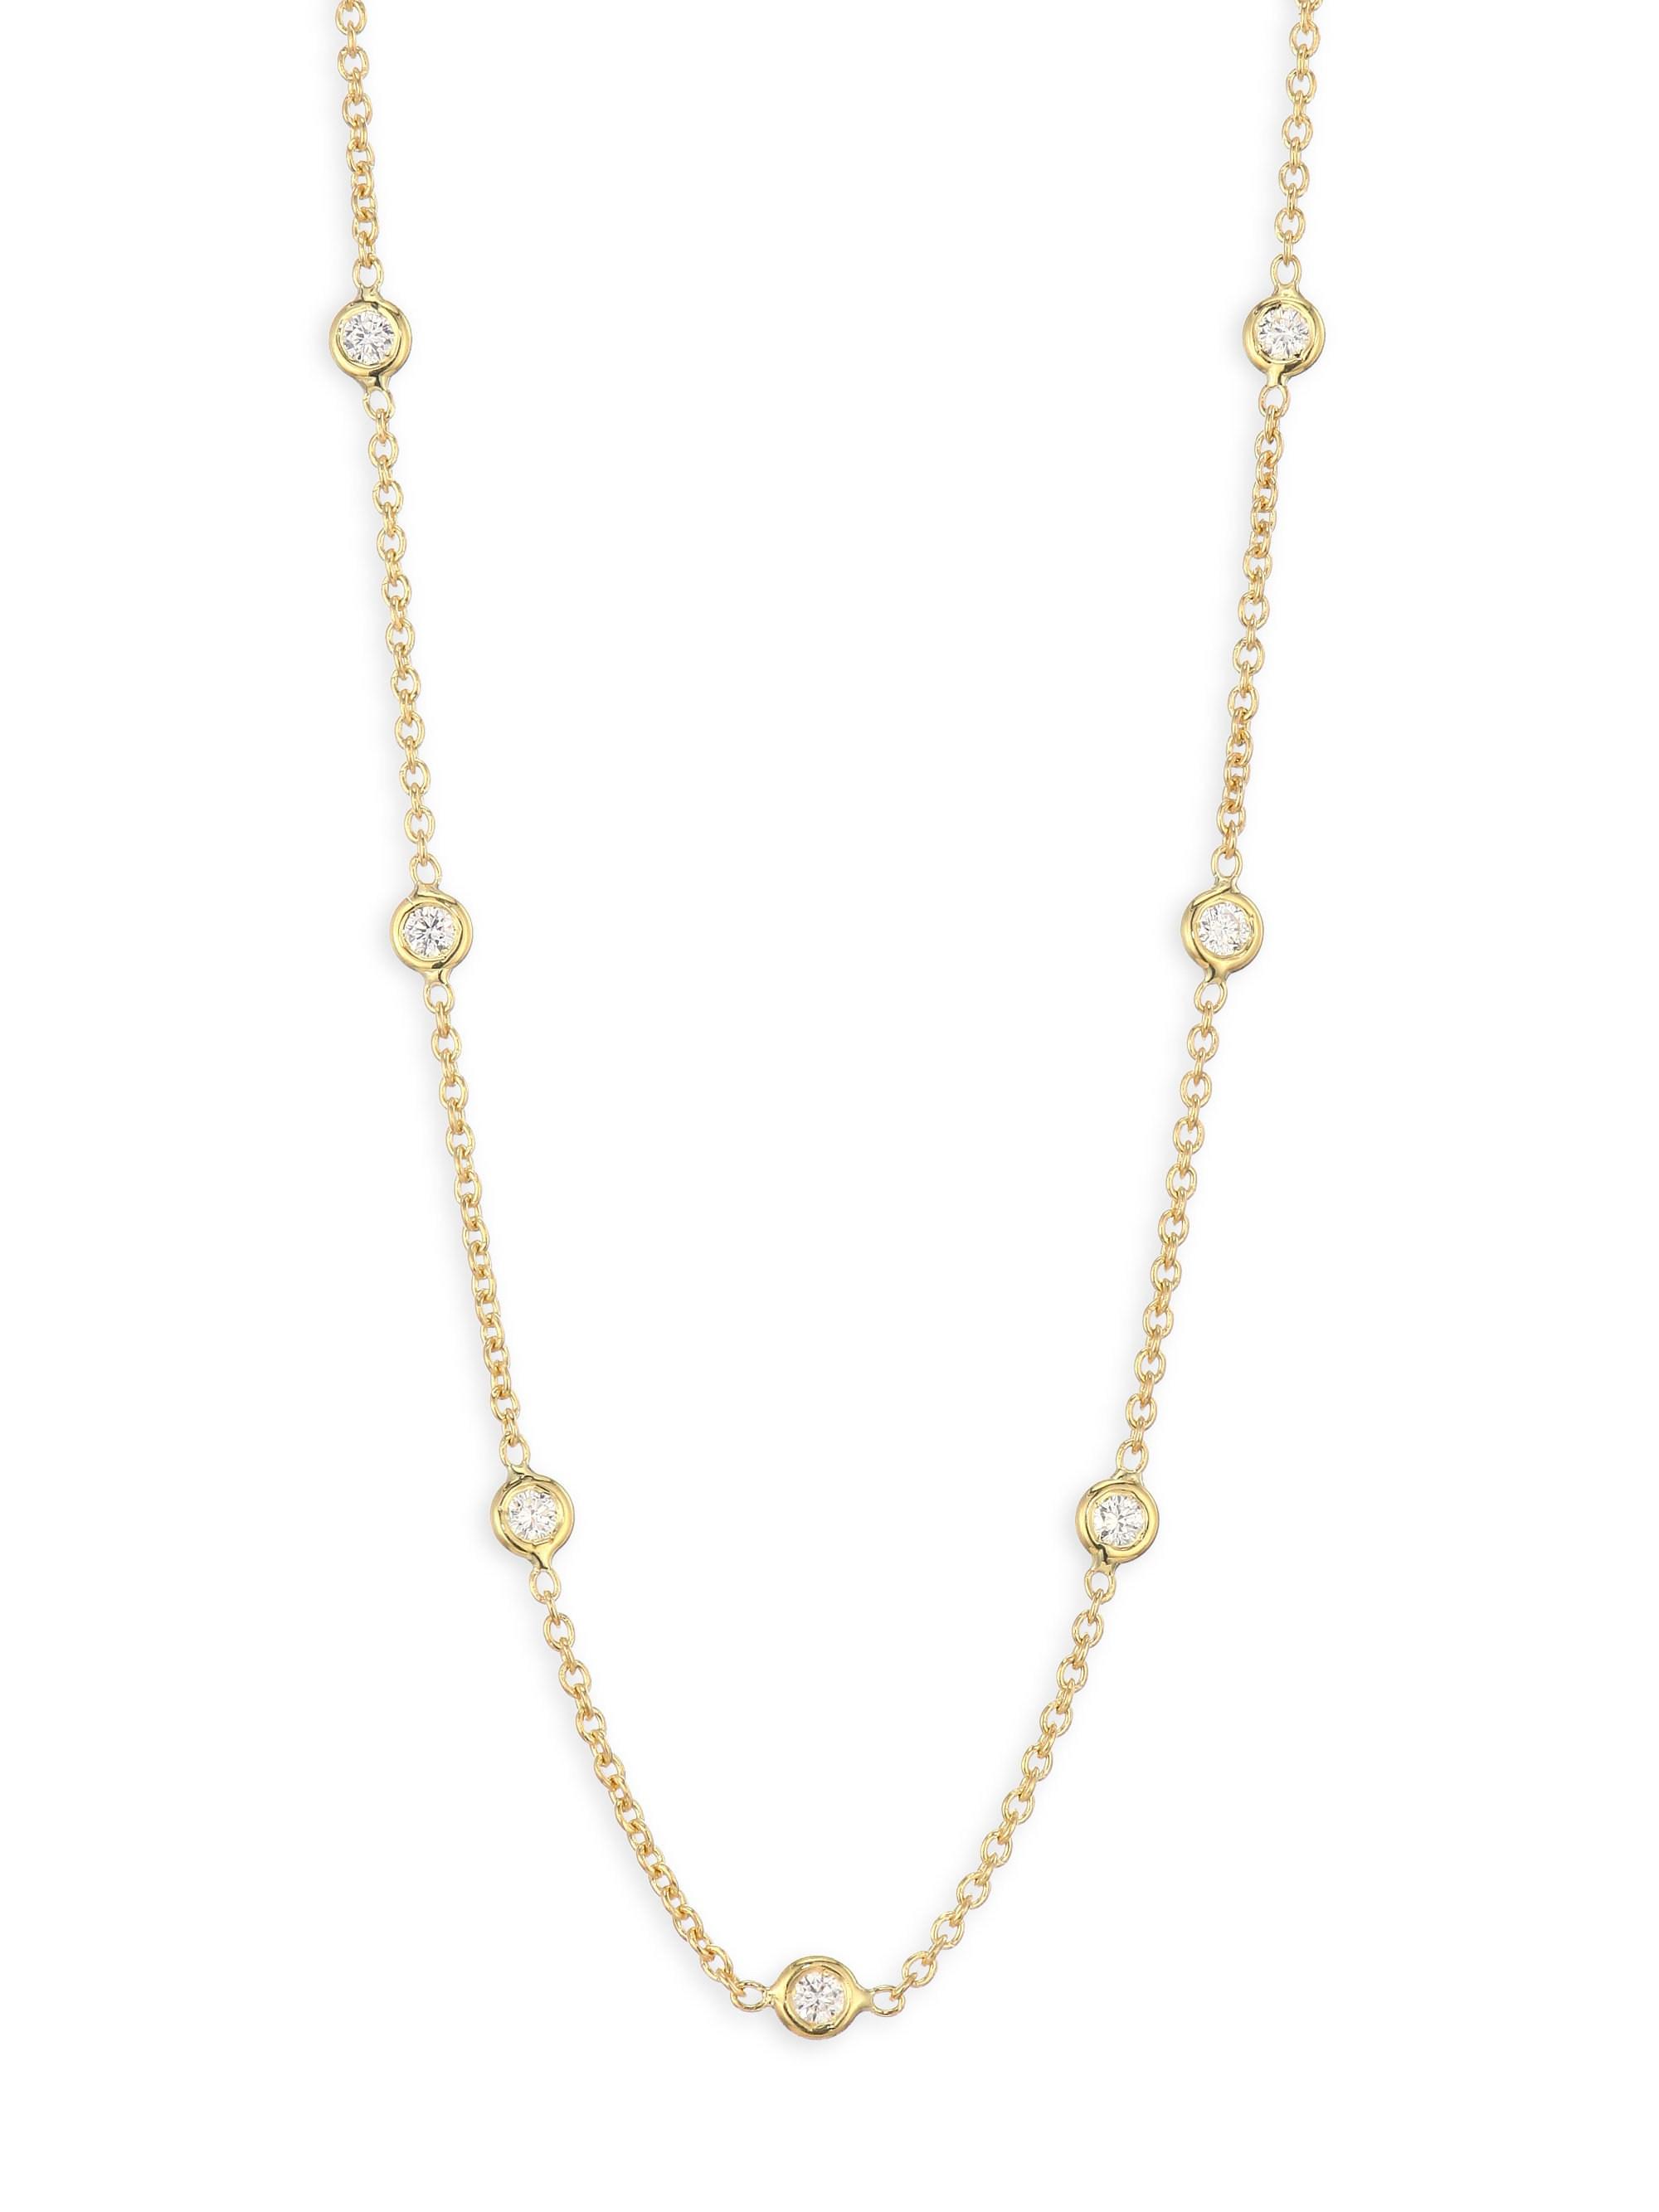 Roberto Coin 18k Yellow Gold & Diamond Station Necklace - Yellow Gold